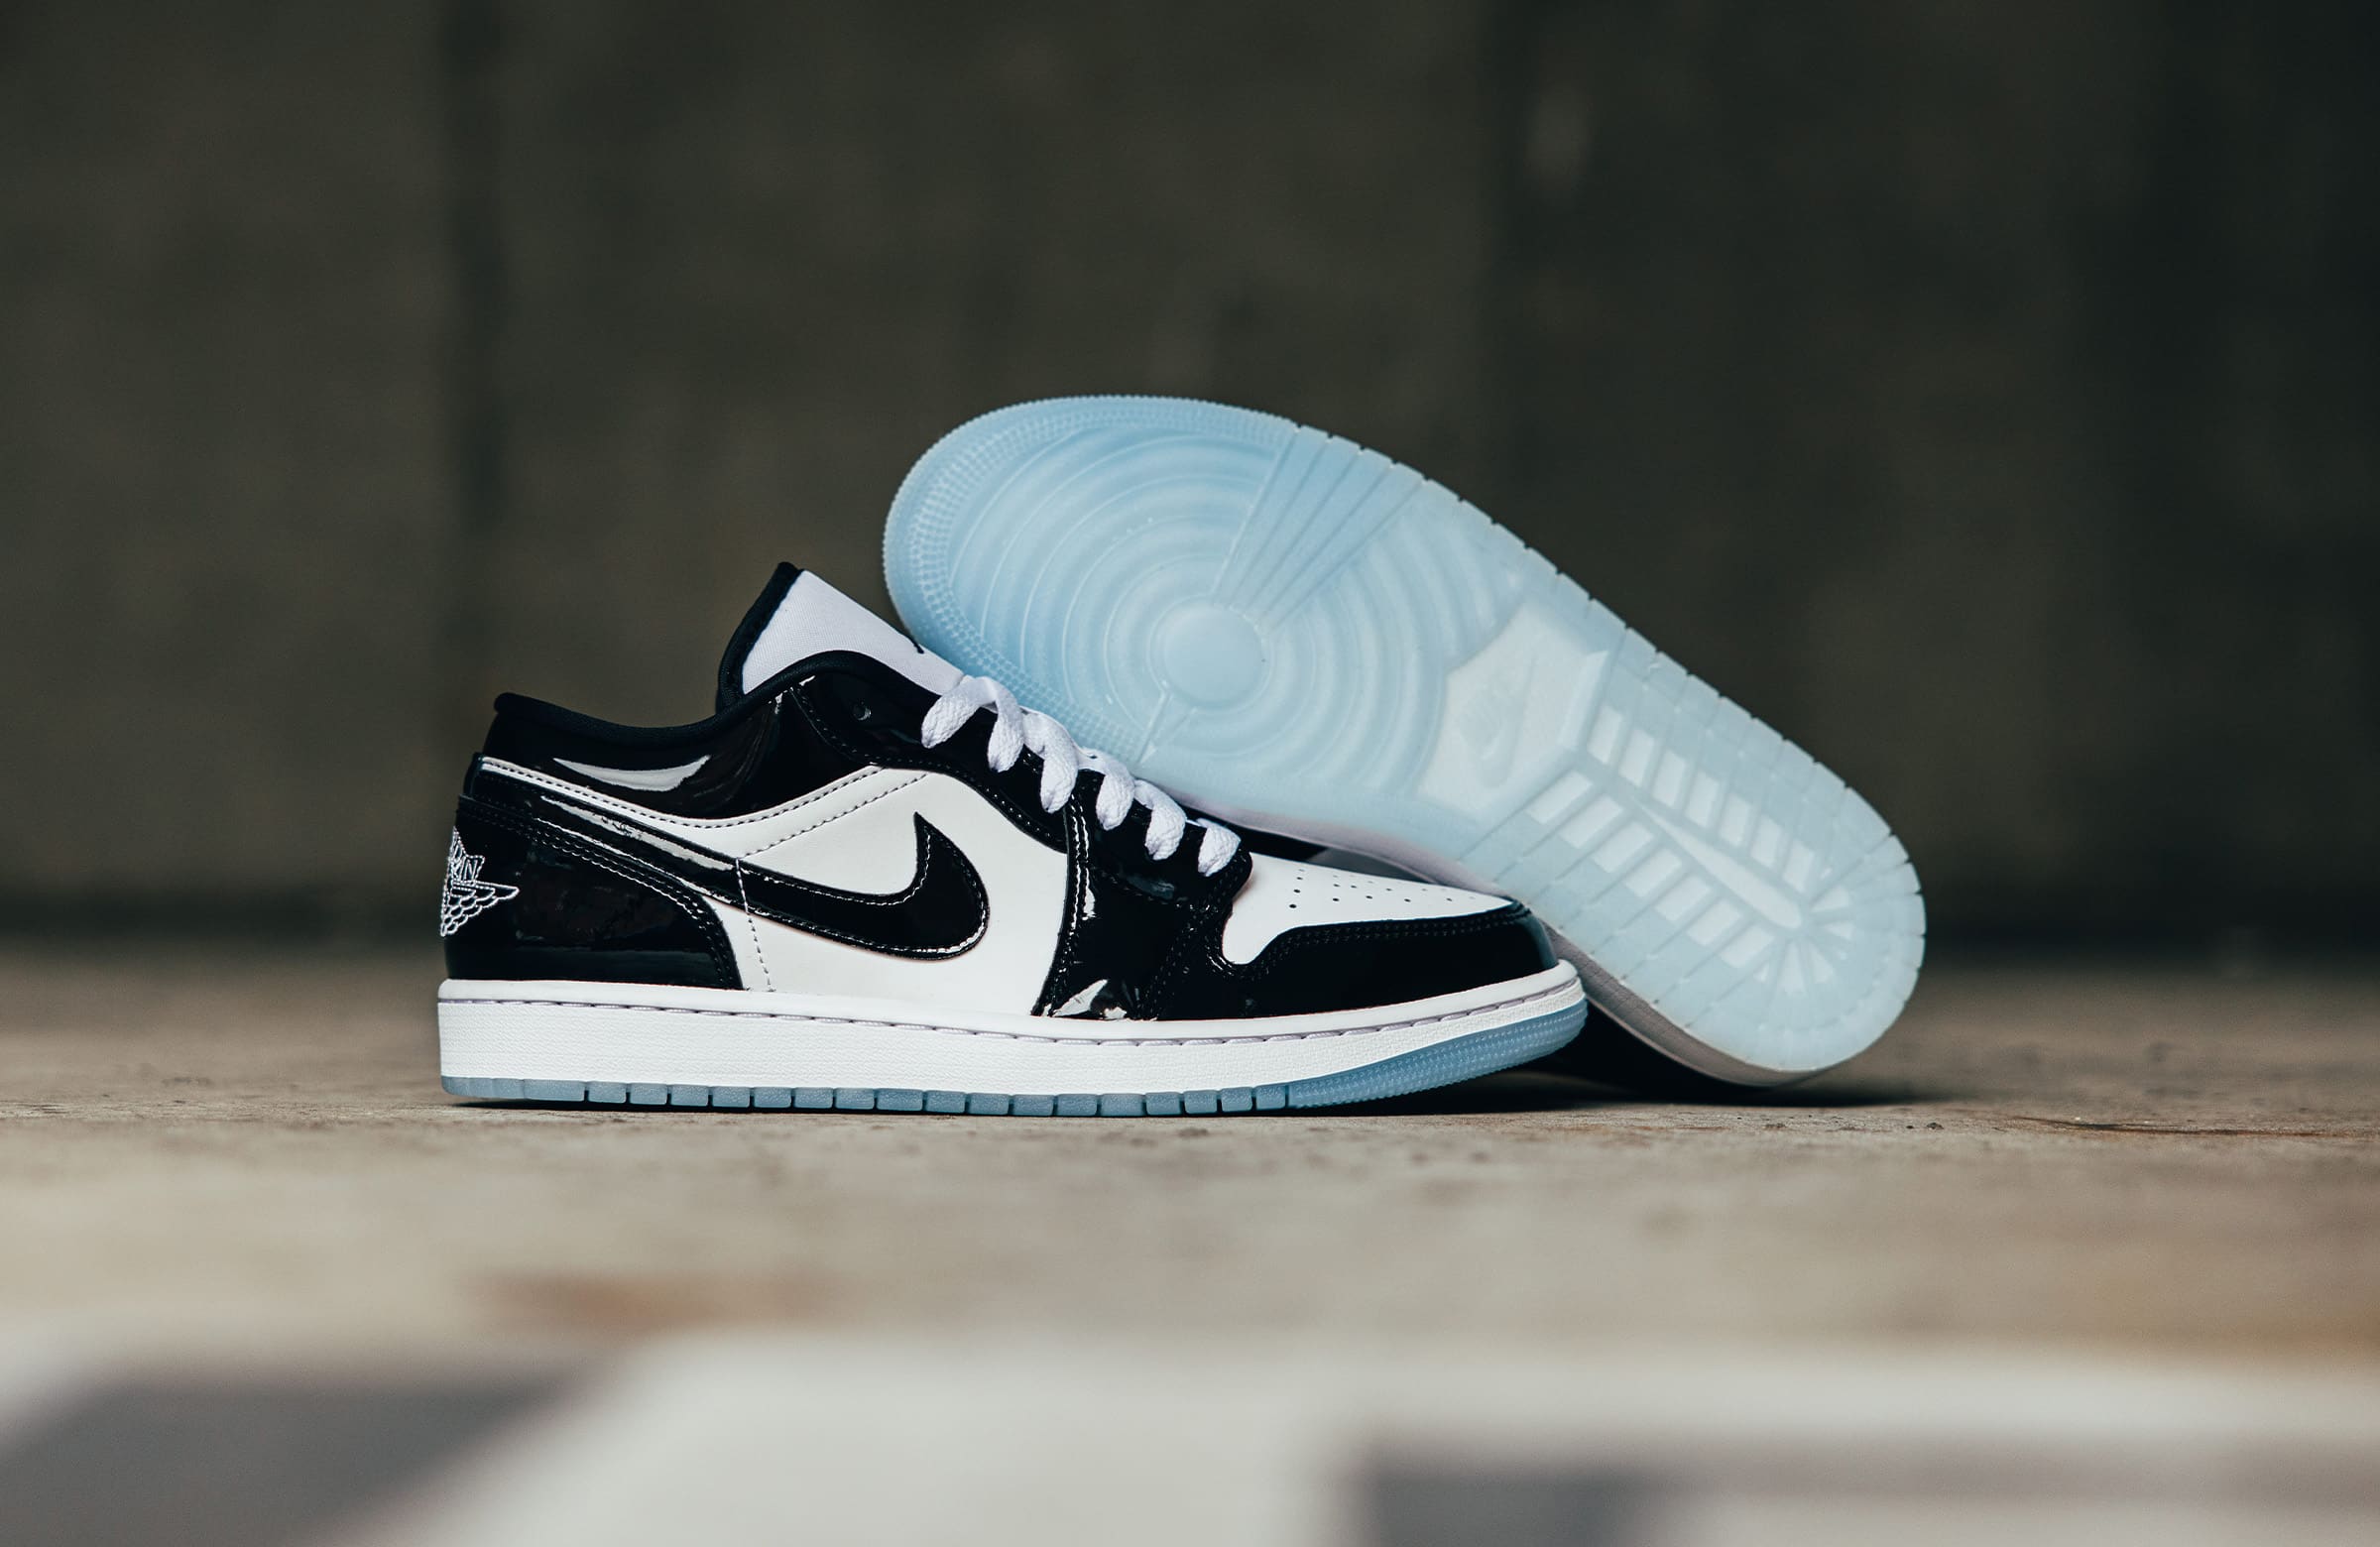 The Air Jordan 1 Low SE “Concord” is Dropping Soon – DTLR